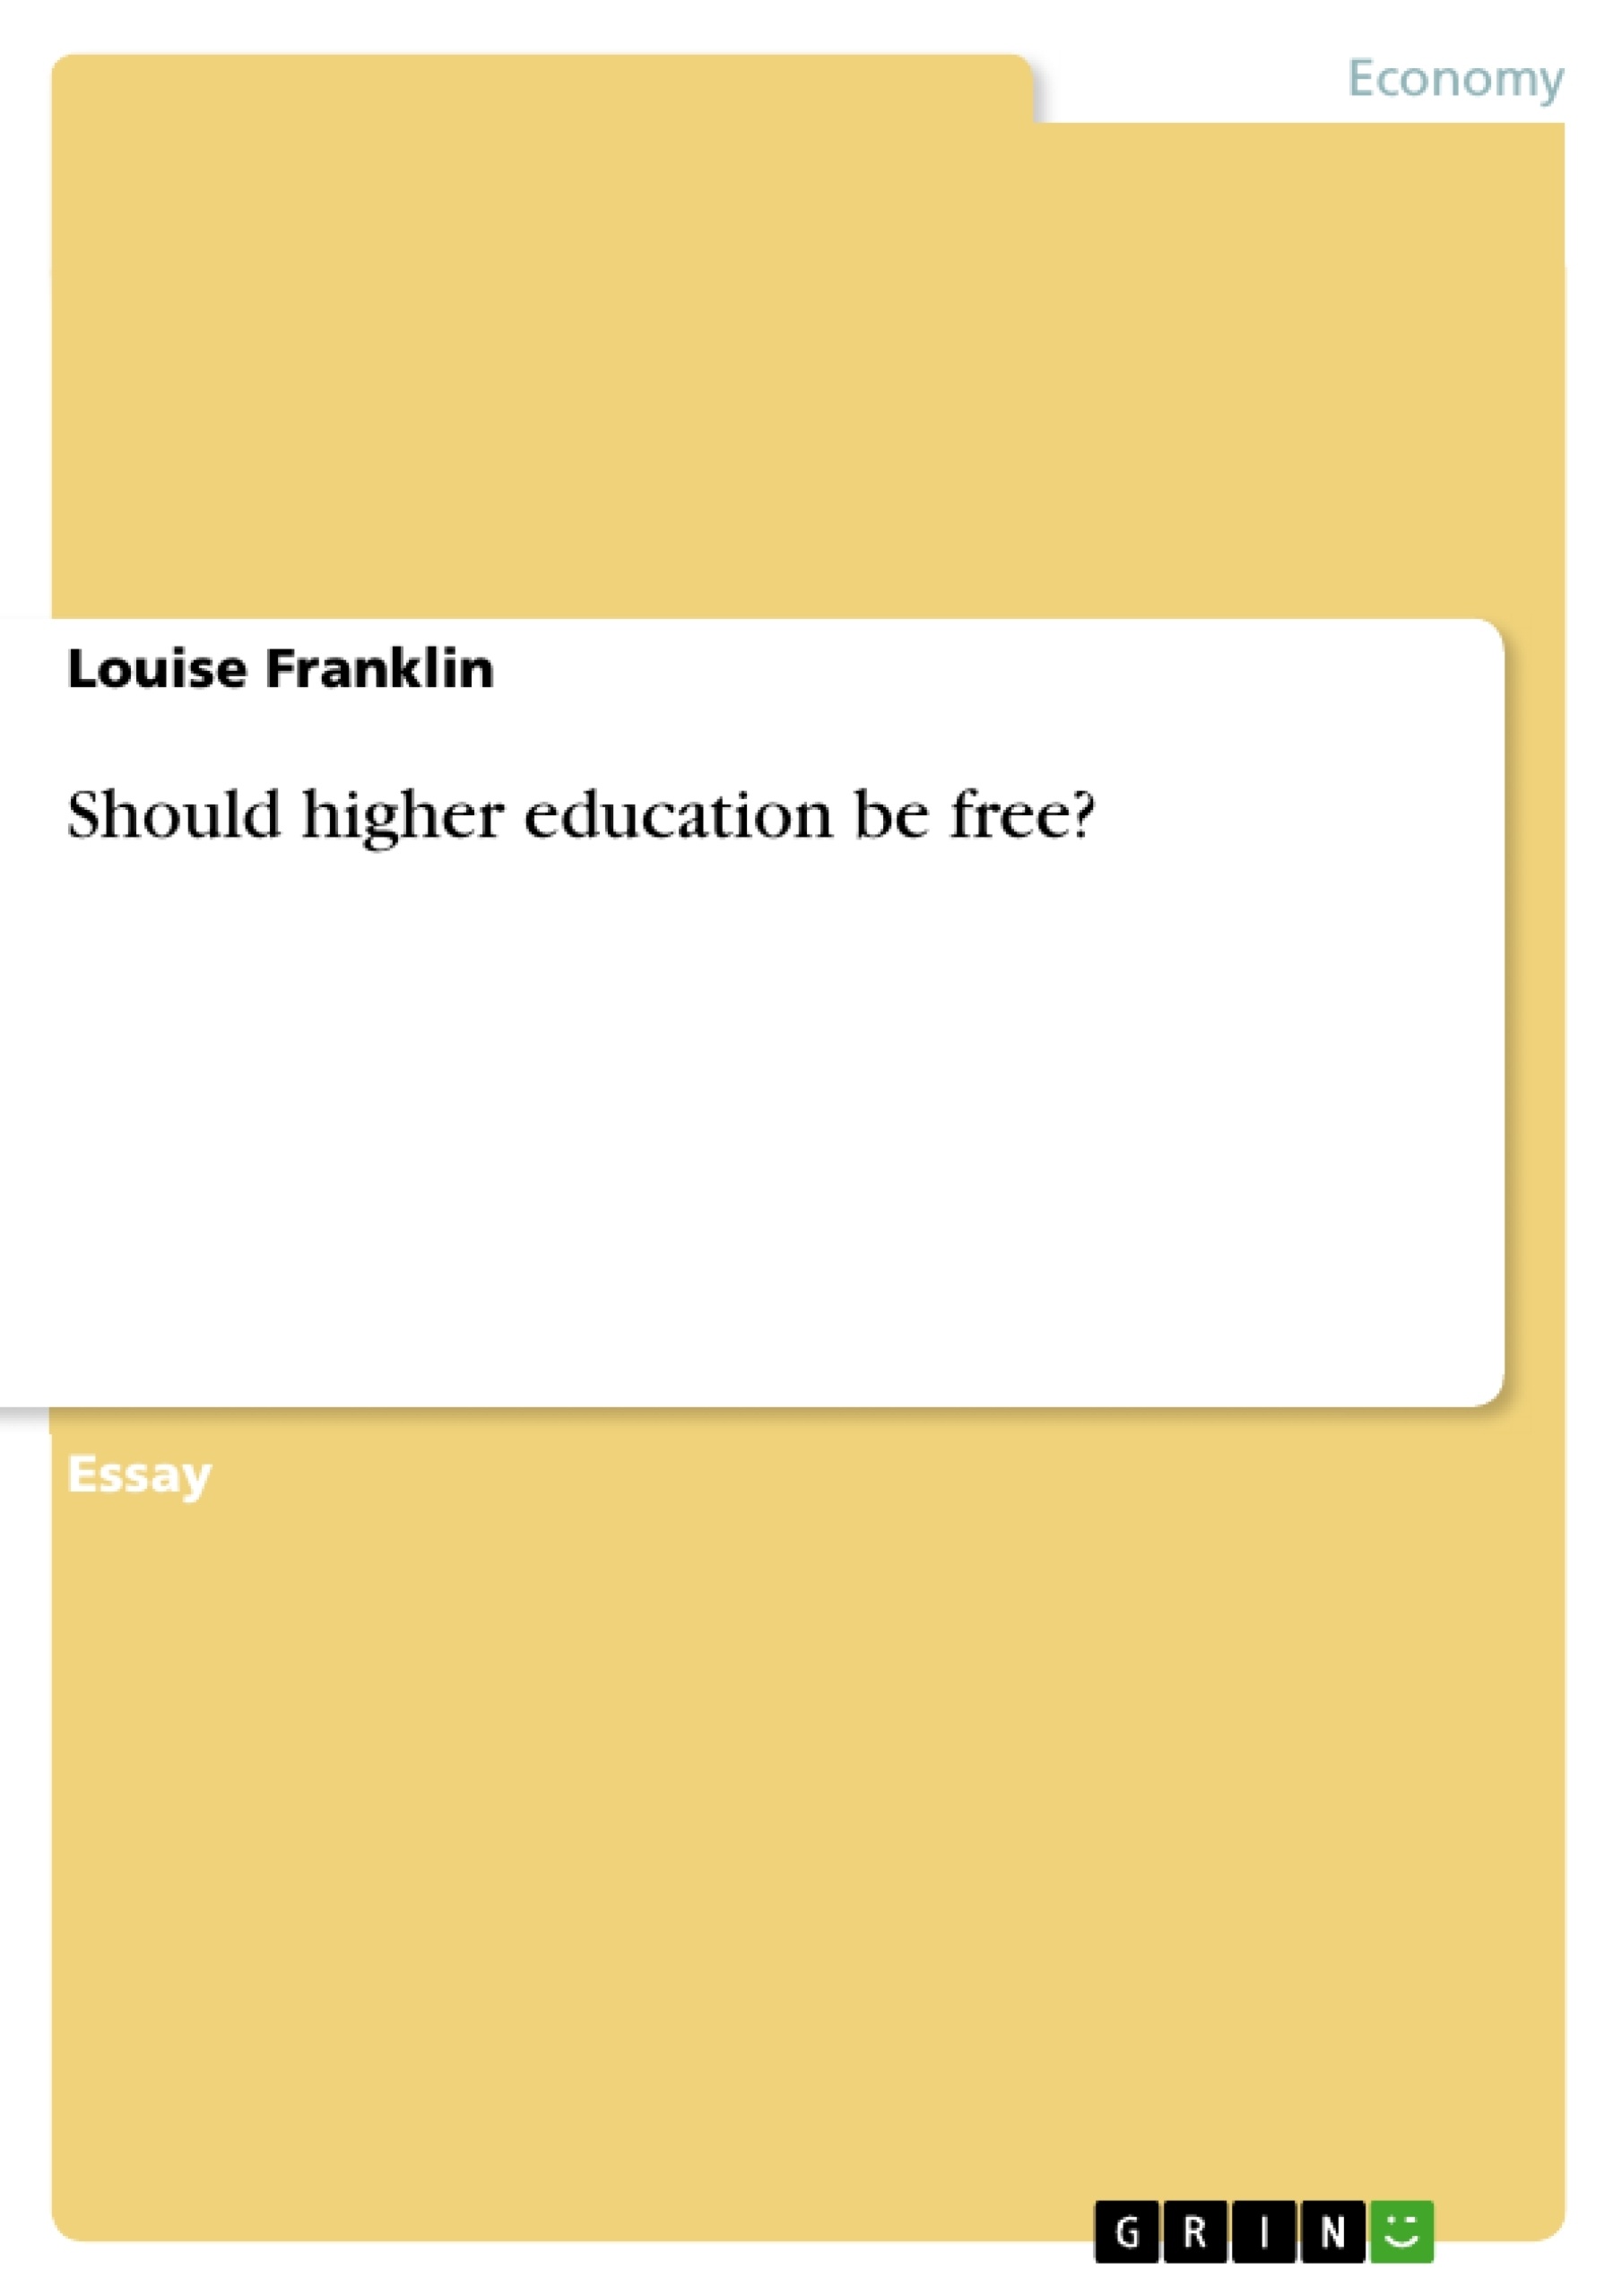 Title: Should higher education be free?